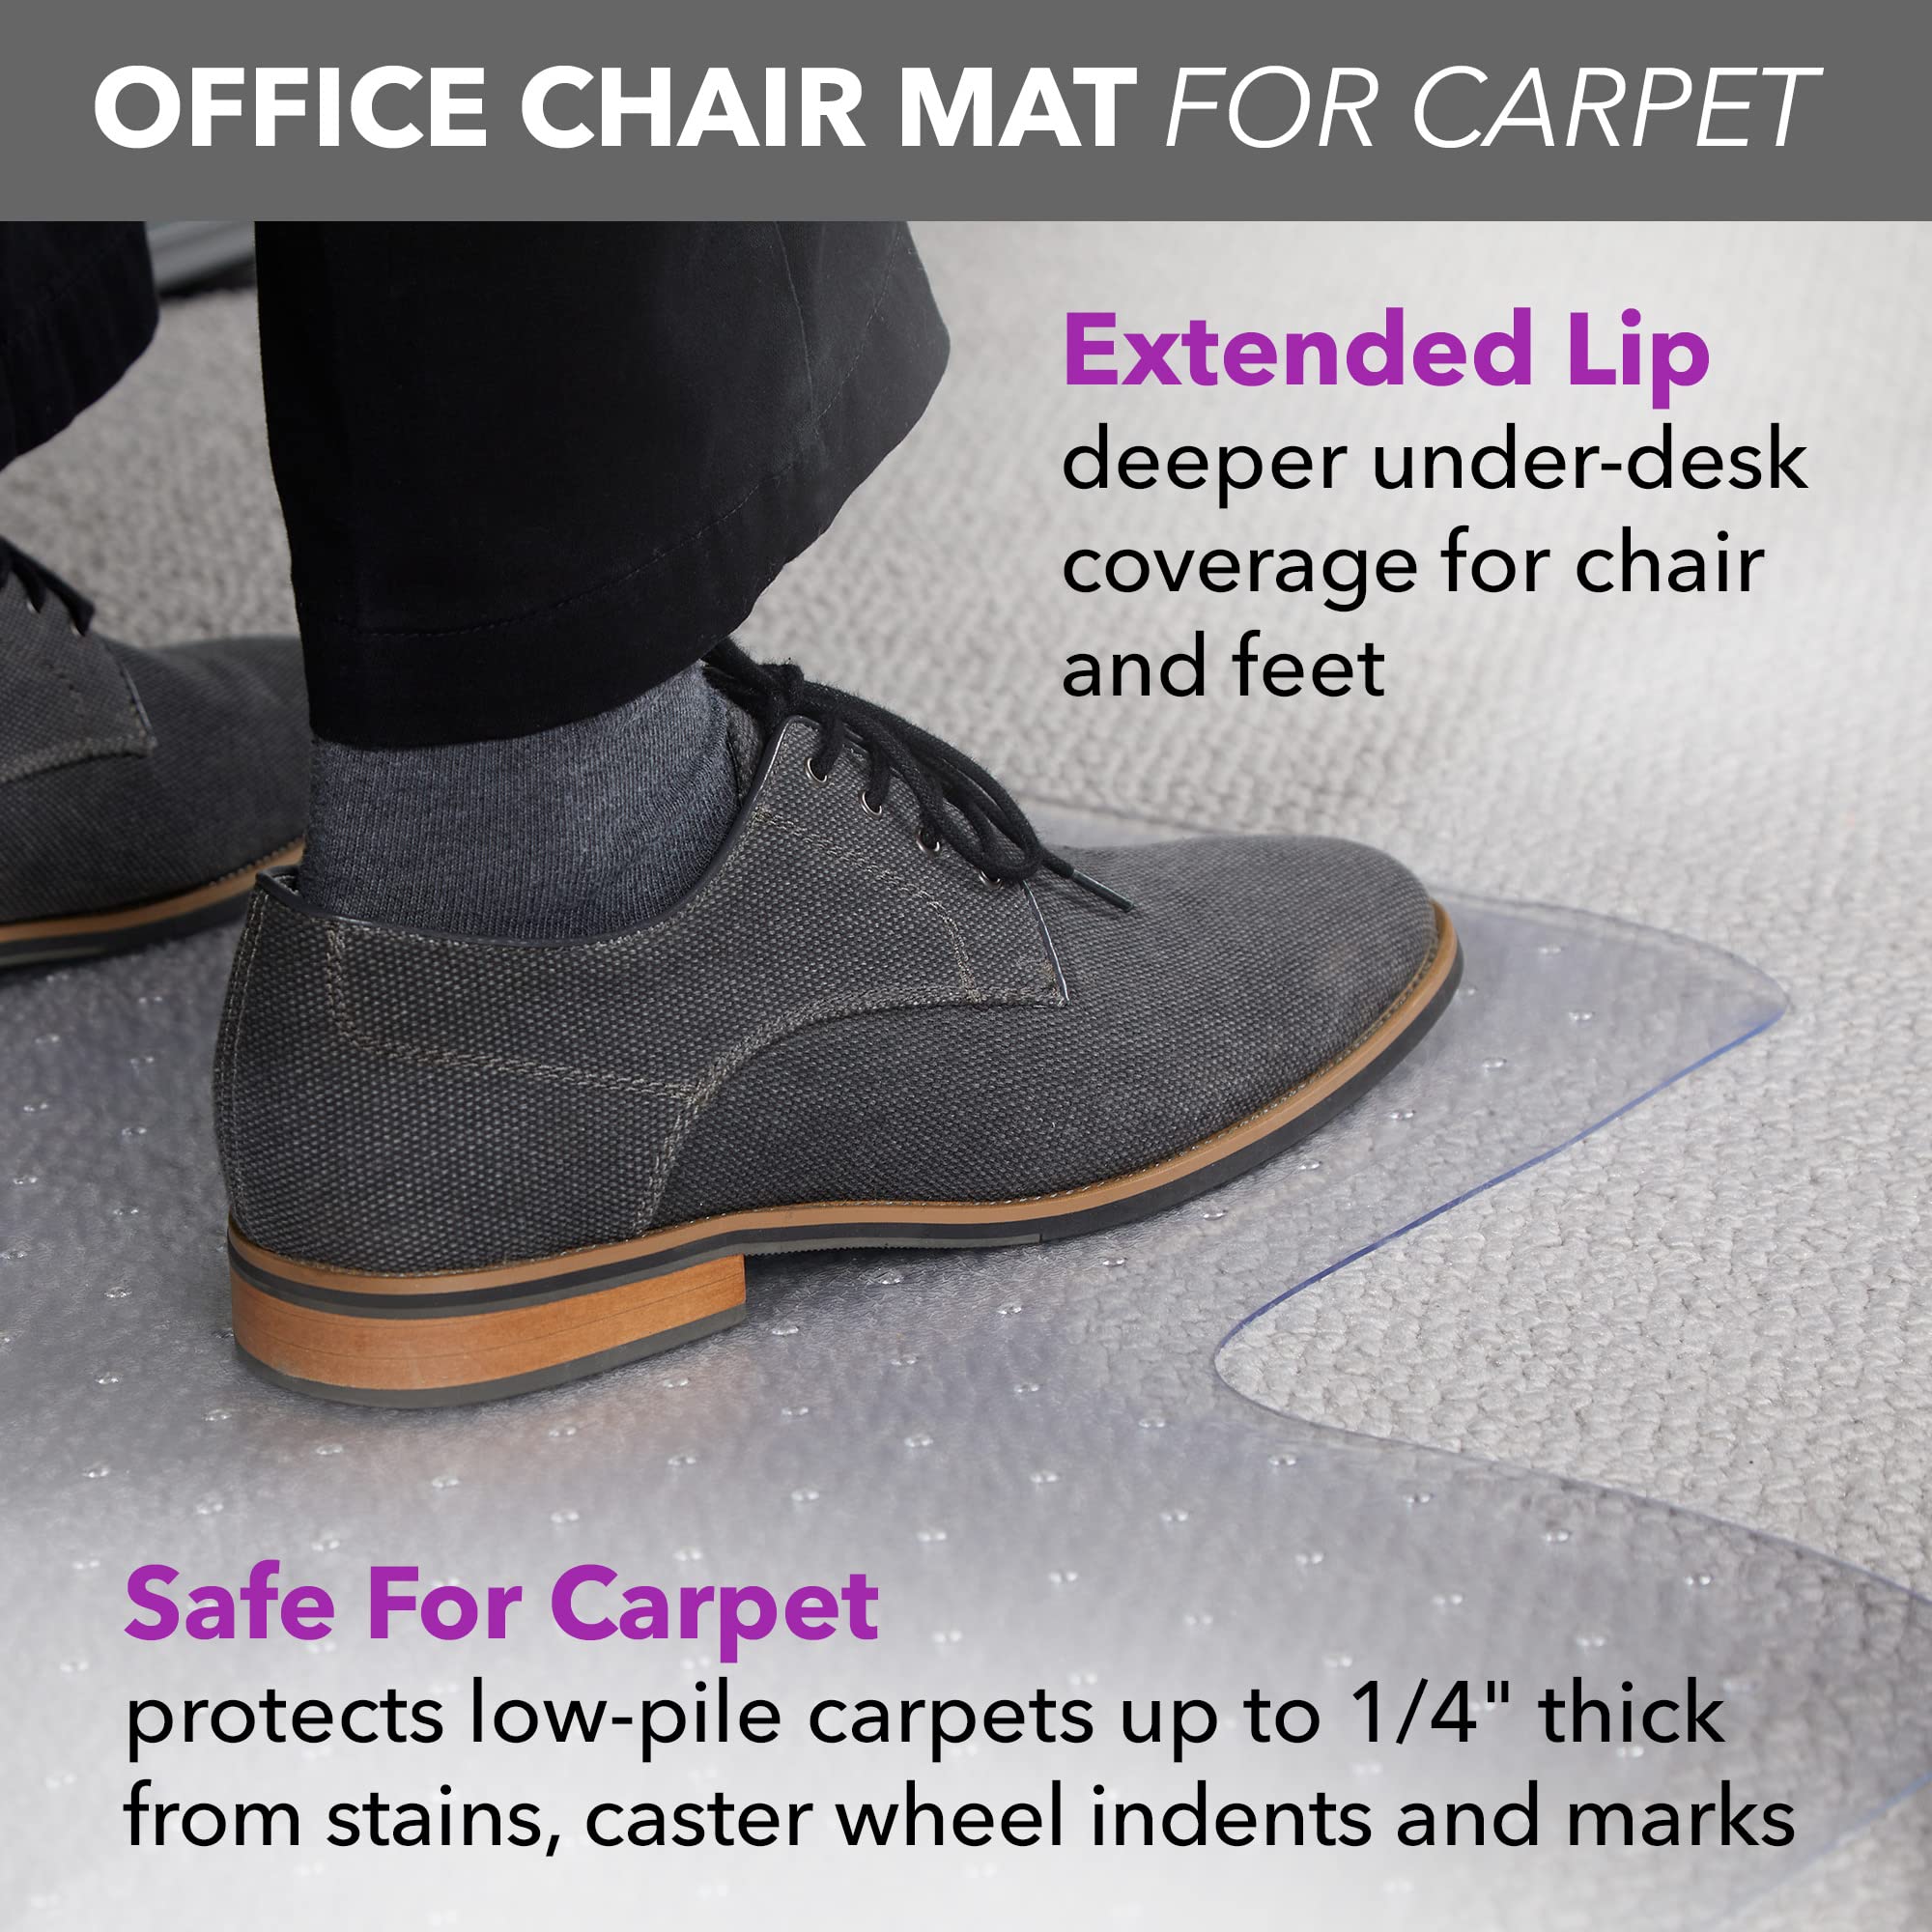 OFM Office Chair Mat for Carpet – Computer Desk Chair Mat for Carpeted Floors – Easy Glide Rolling Plastic Floor Mat for Office Chair on Carpet for Work, Home, Gaming with Extended Lip (36” x 48”)